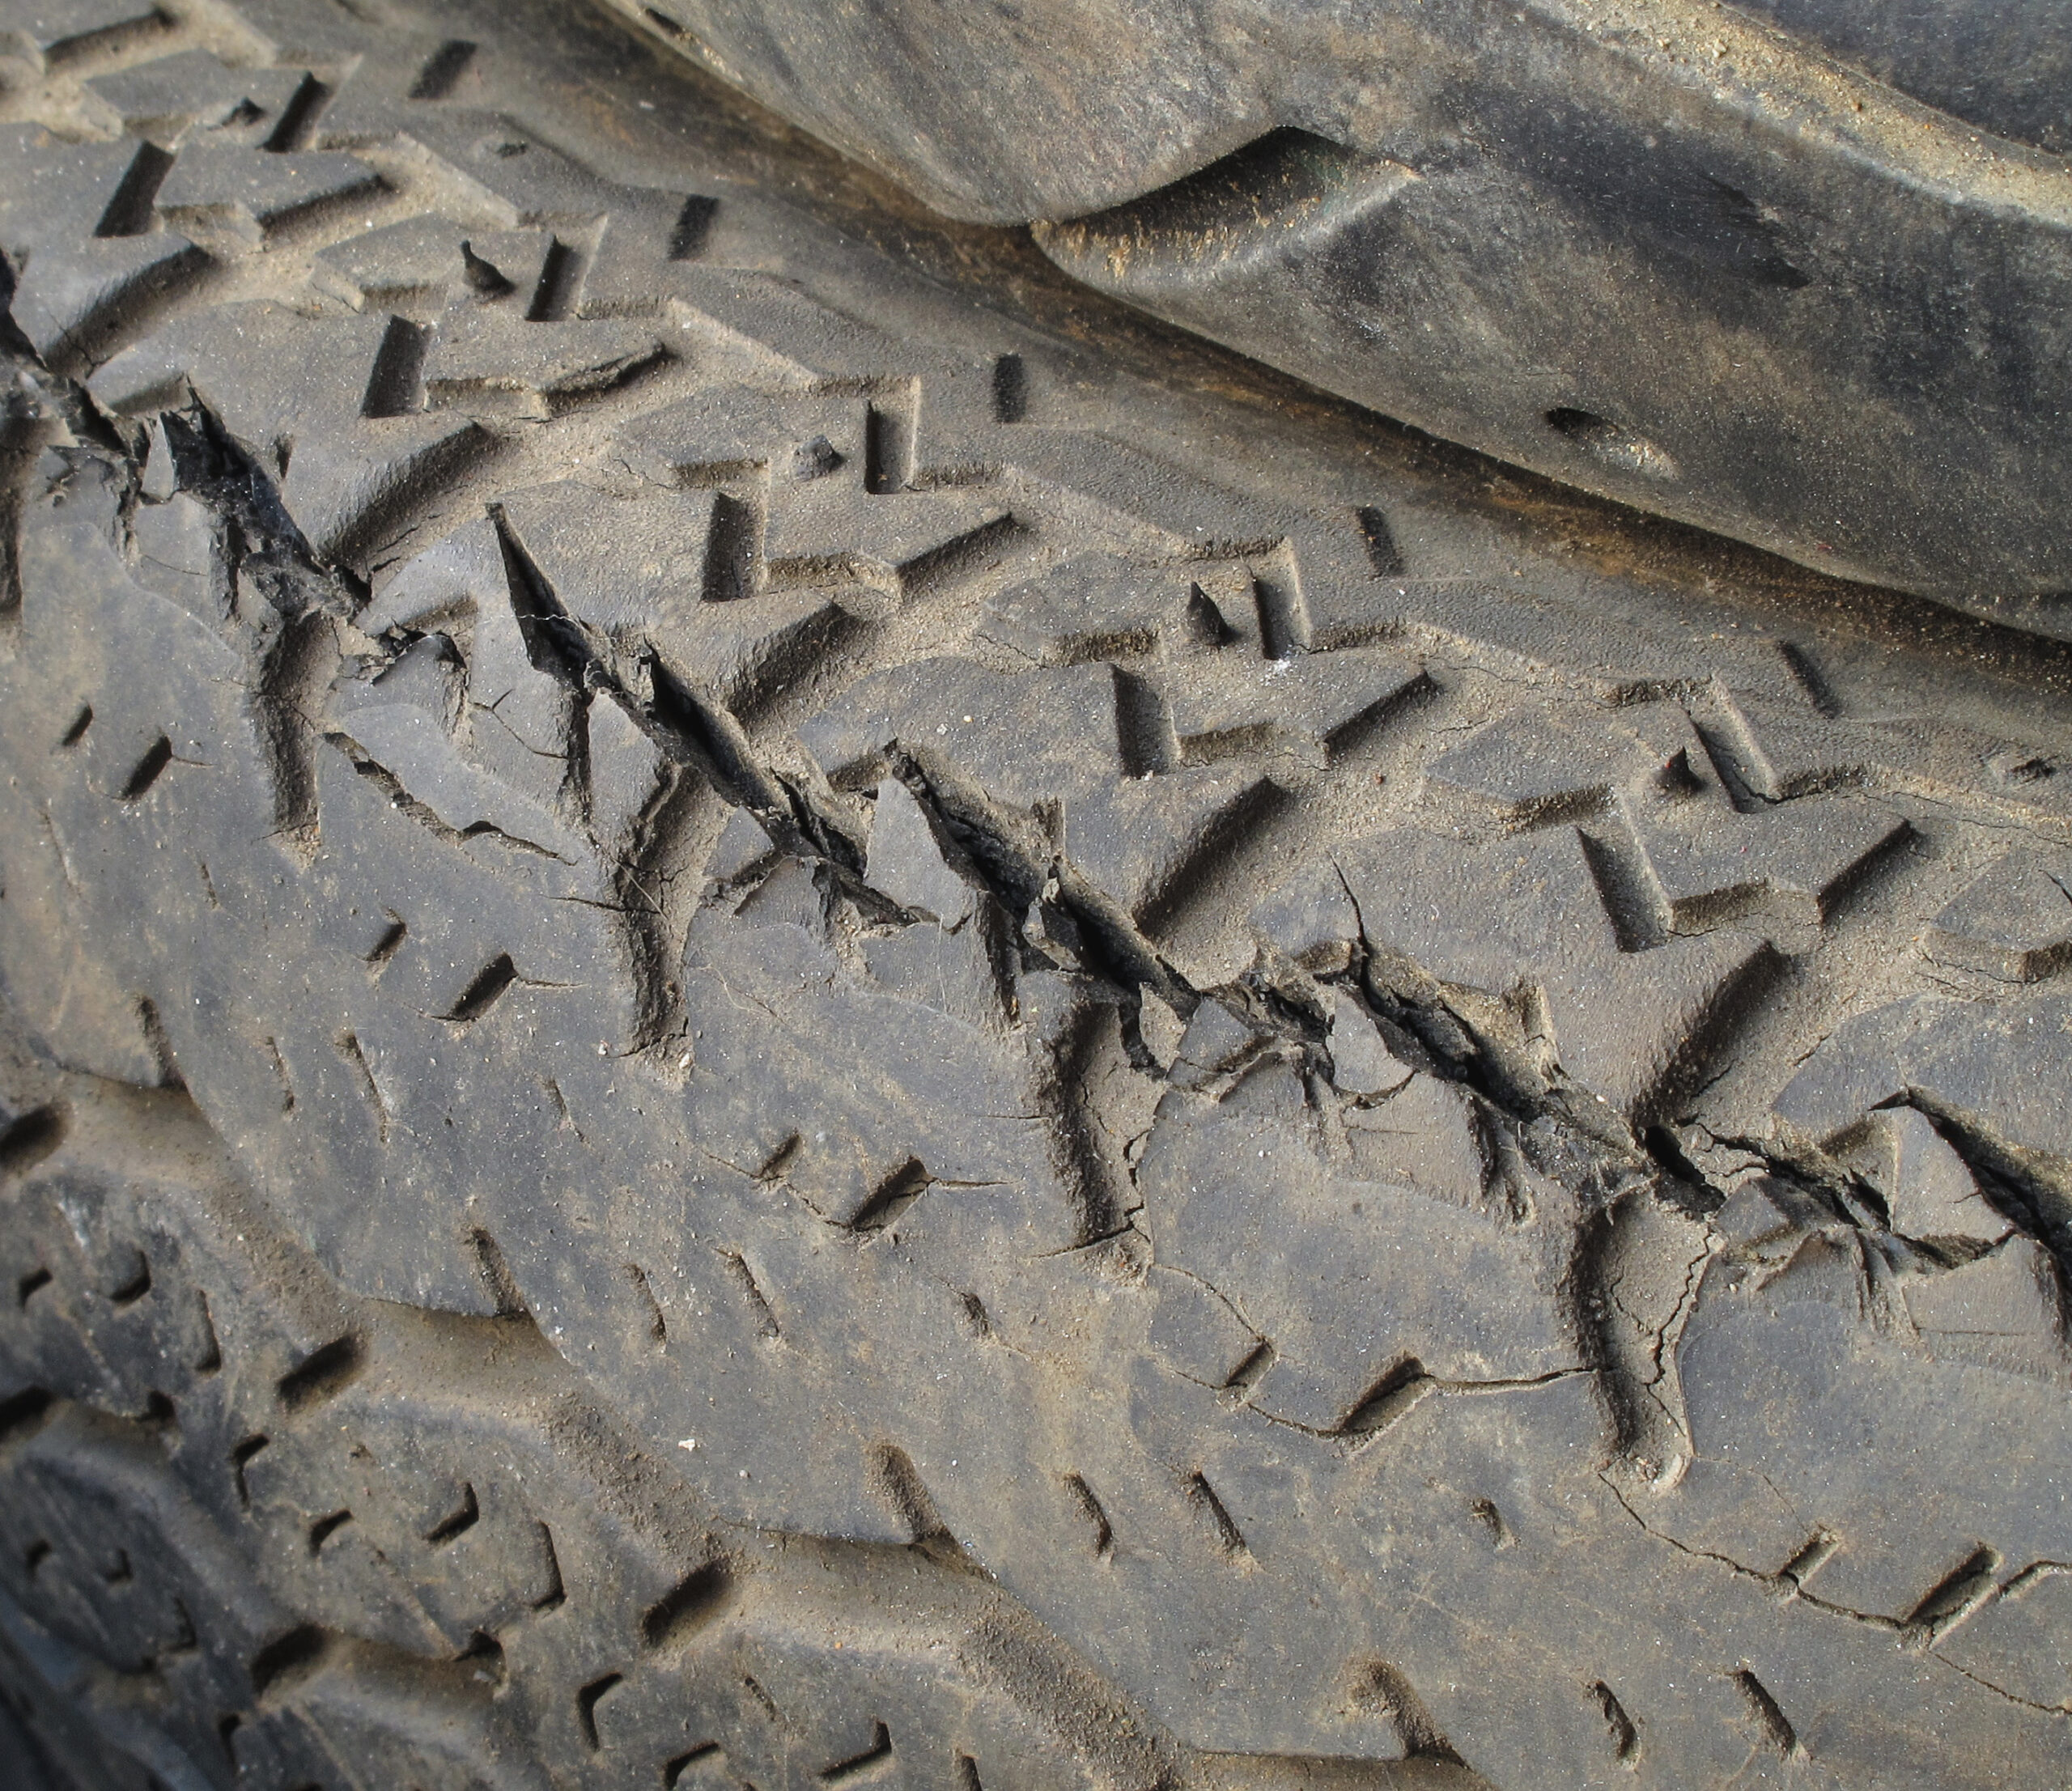 Tires Cracking